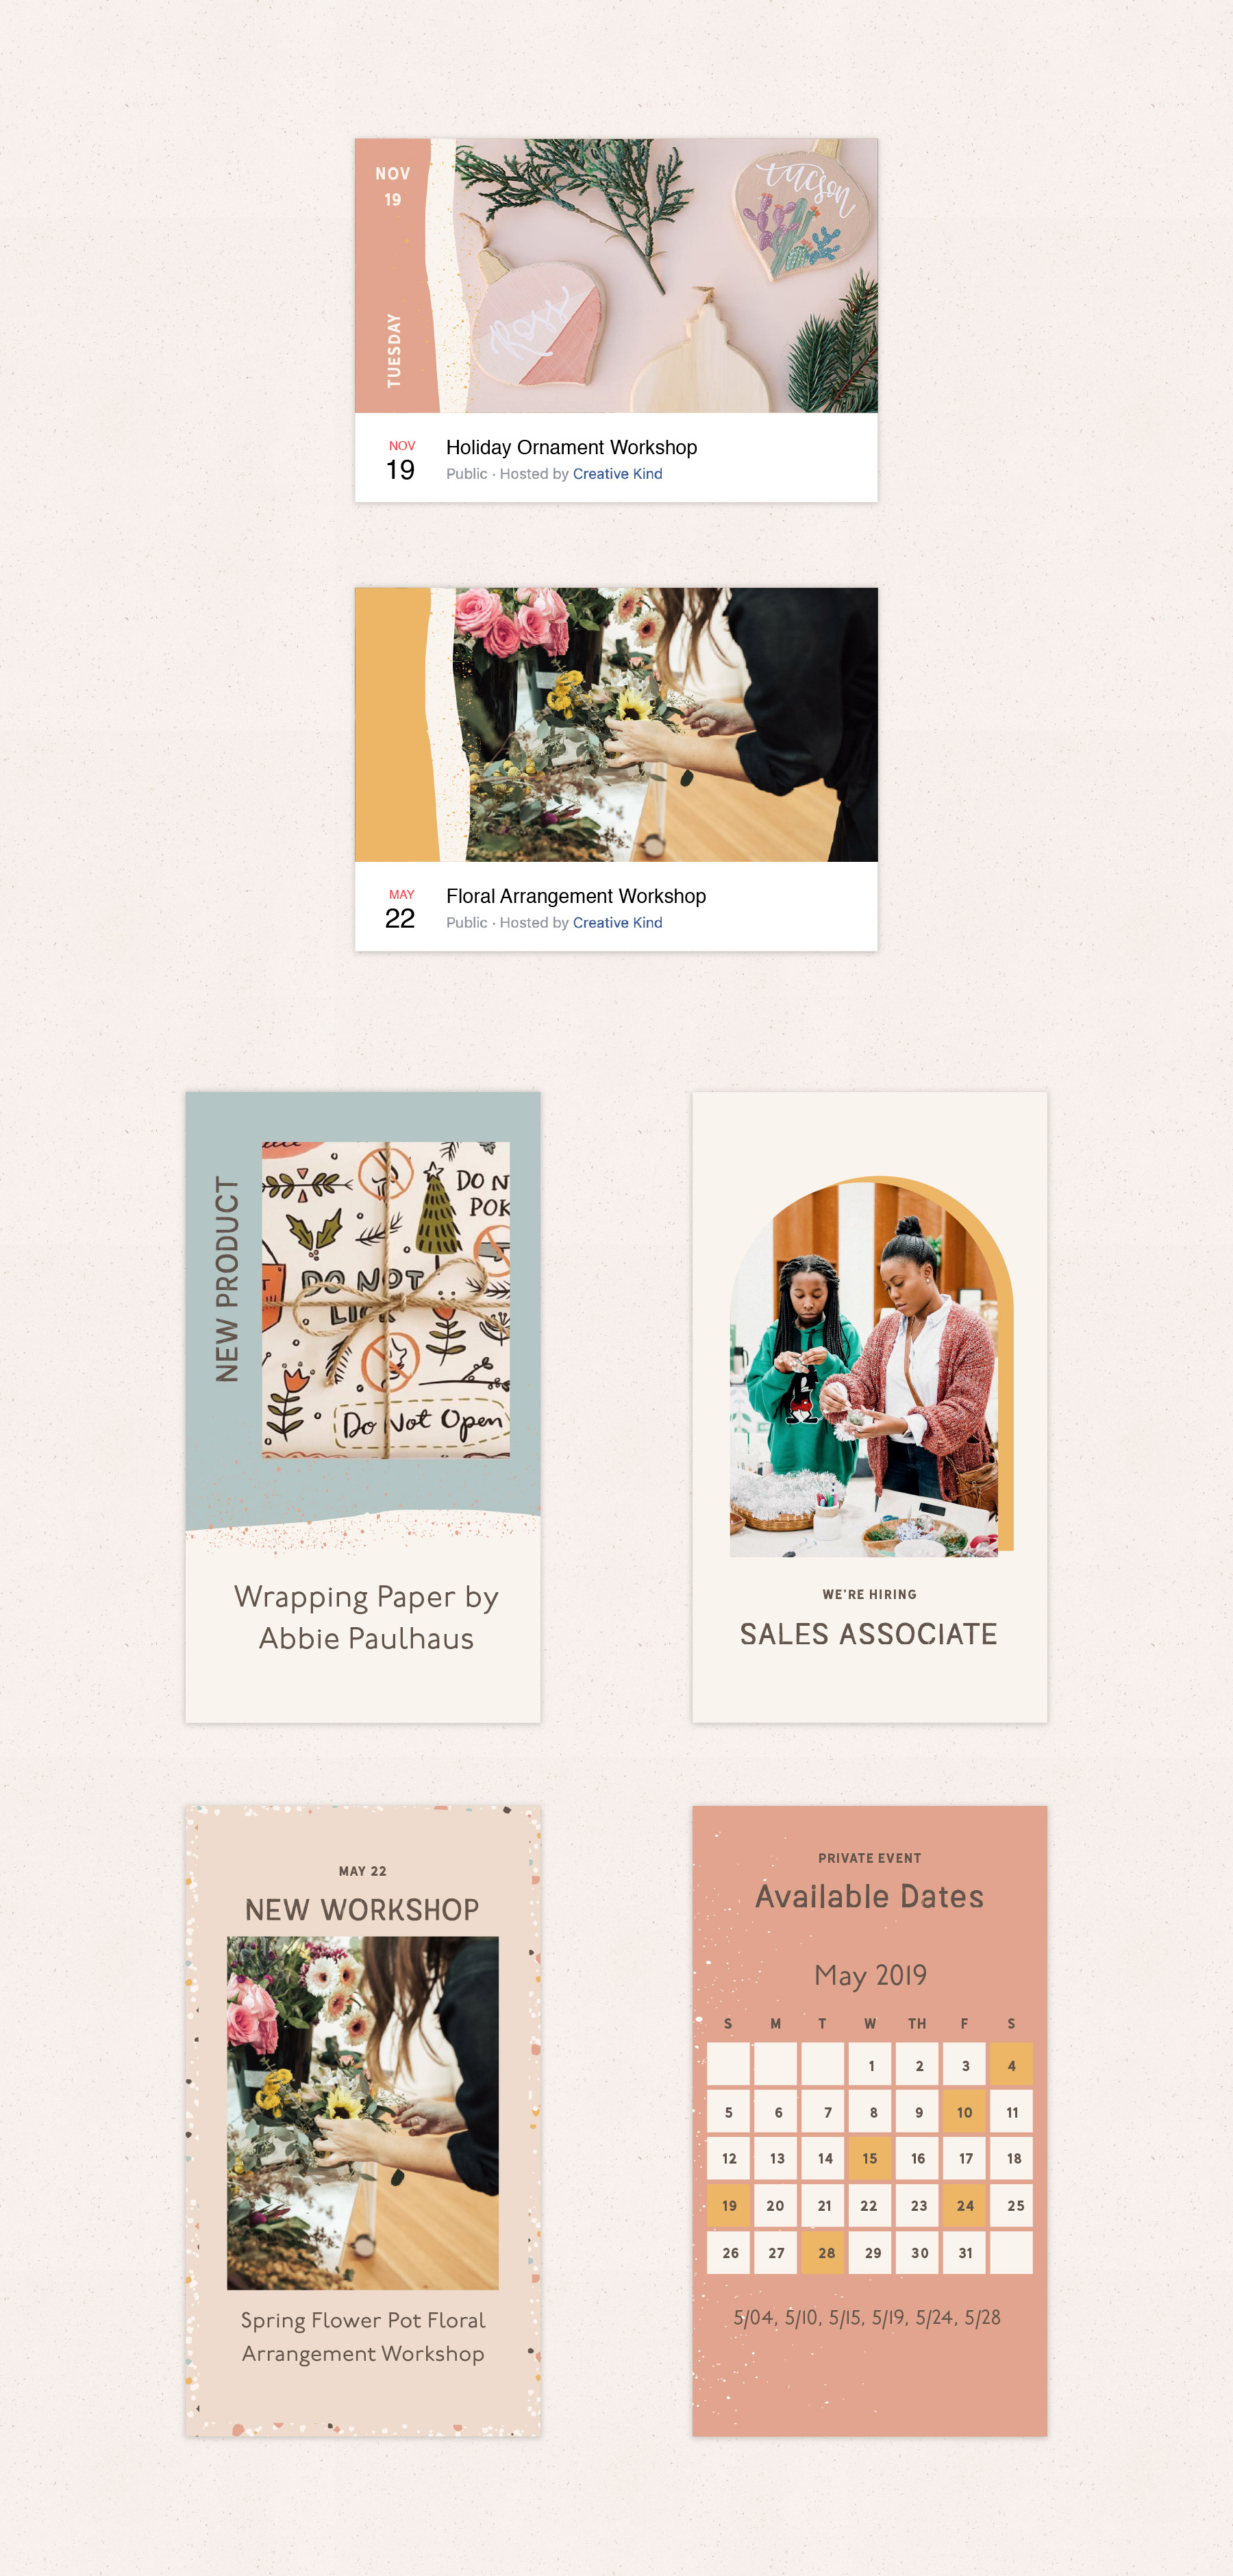 scrapbook style social media templates for events